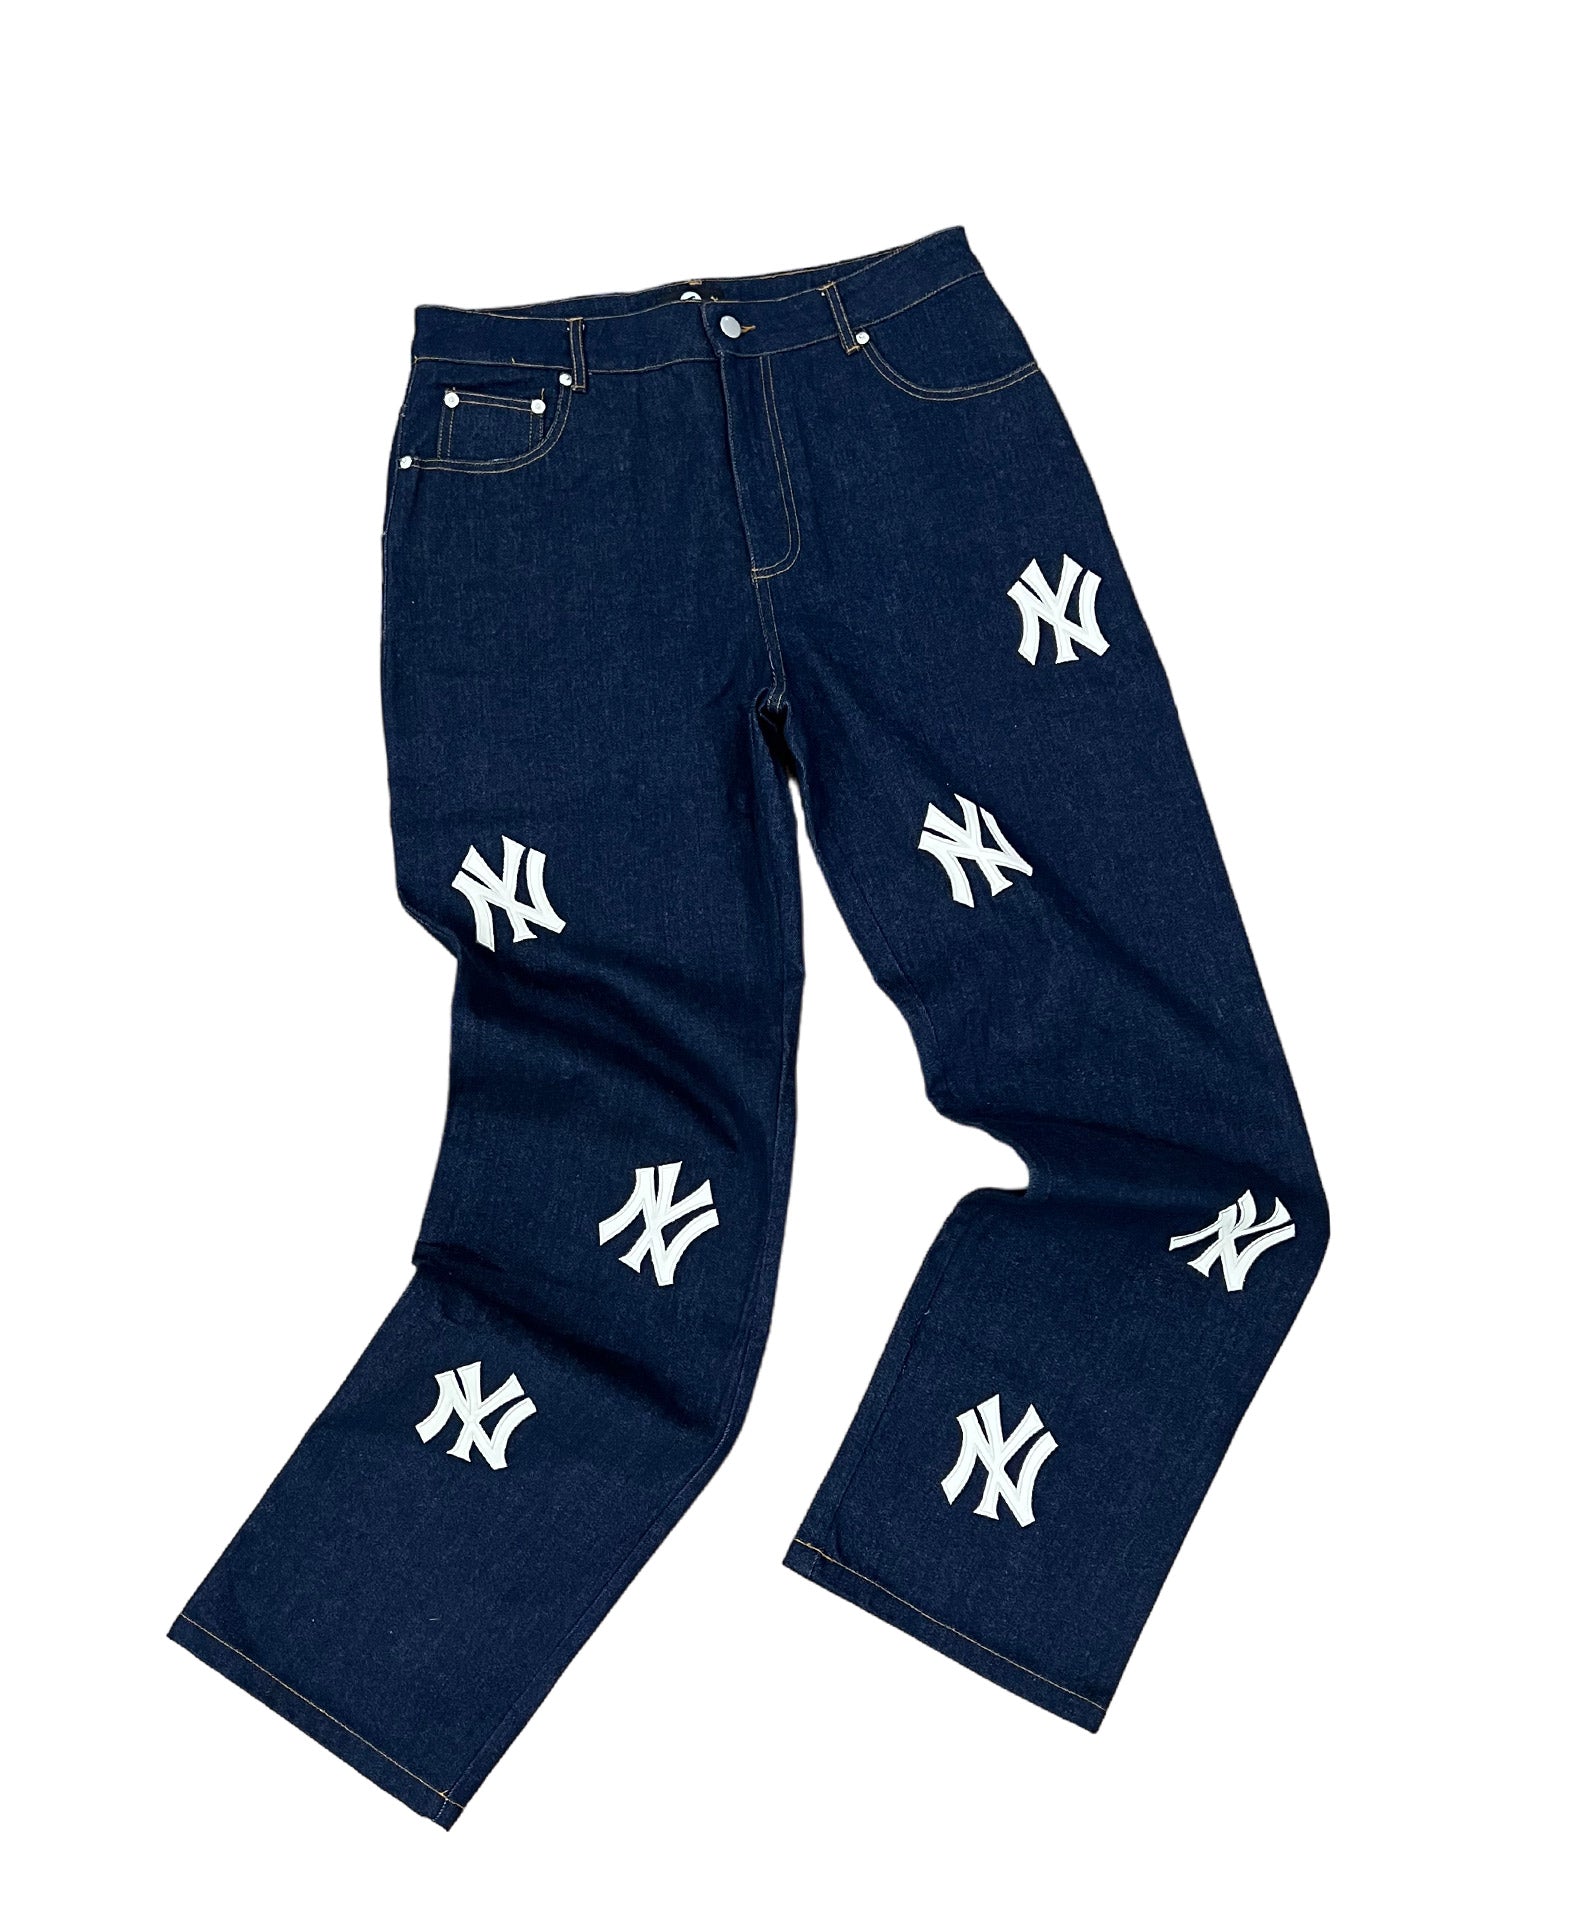 New York Patch Jeans - Navy